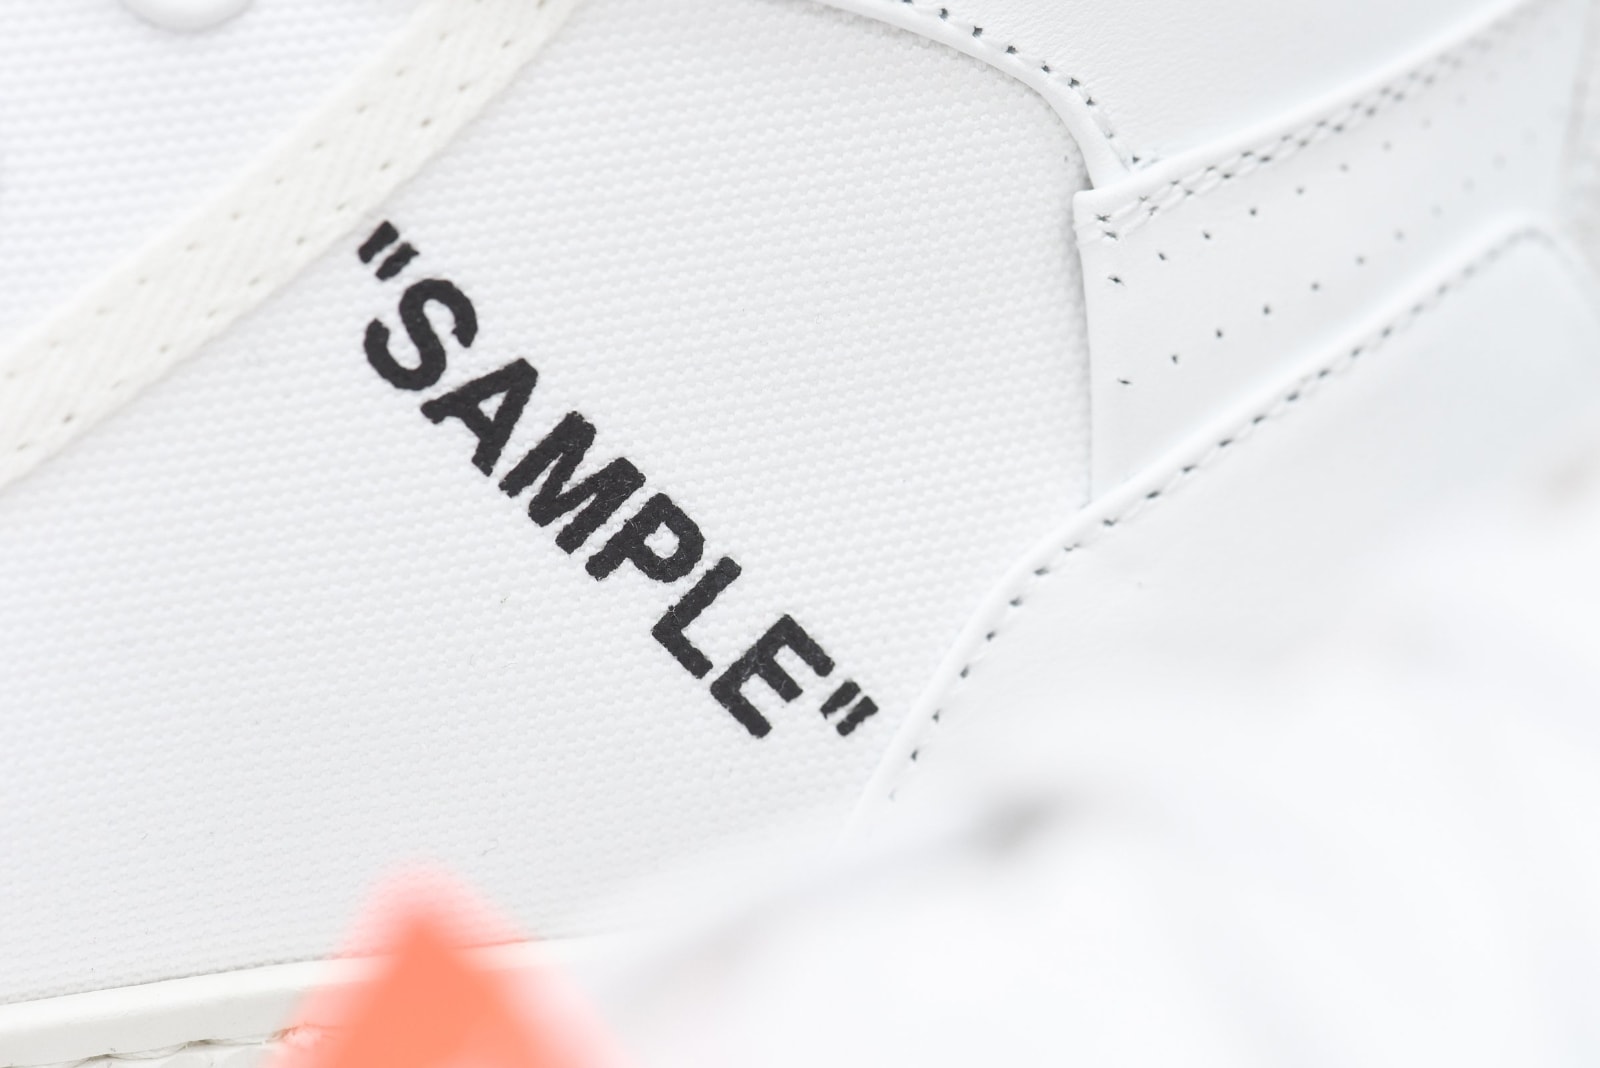 Off-White™ LOW 3.0 Sneaker release date purchase virgil abloh kith